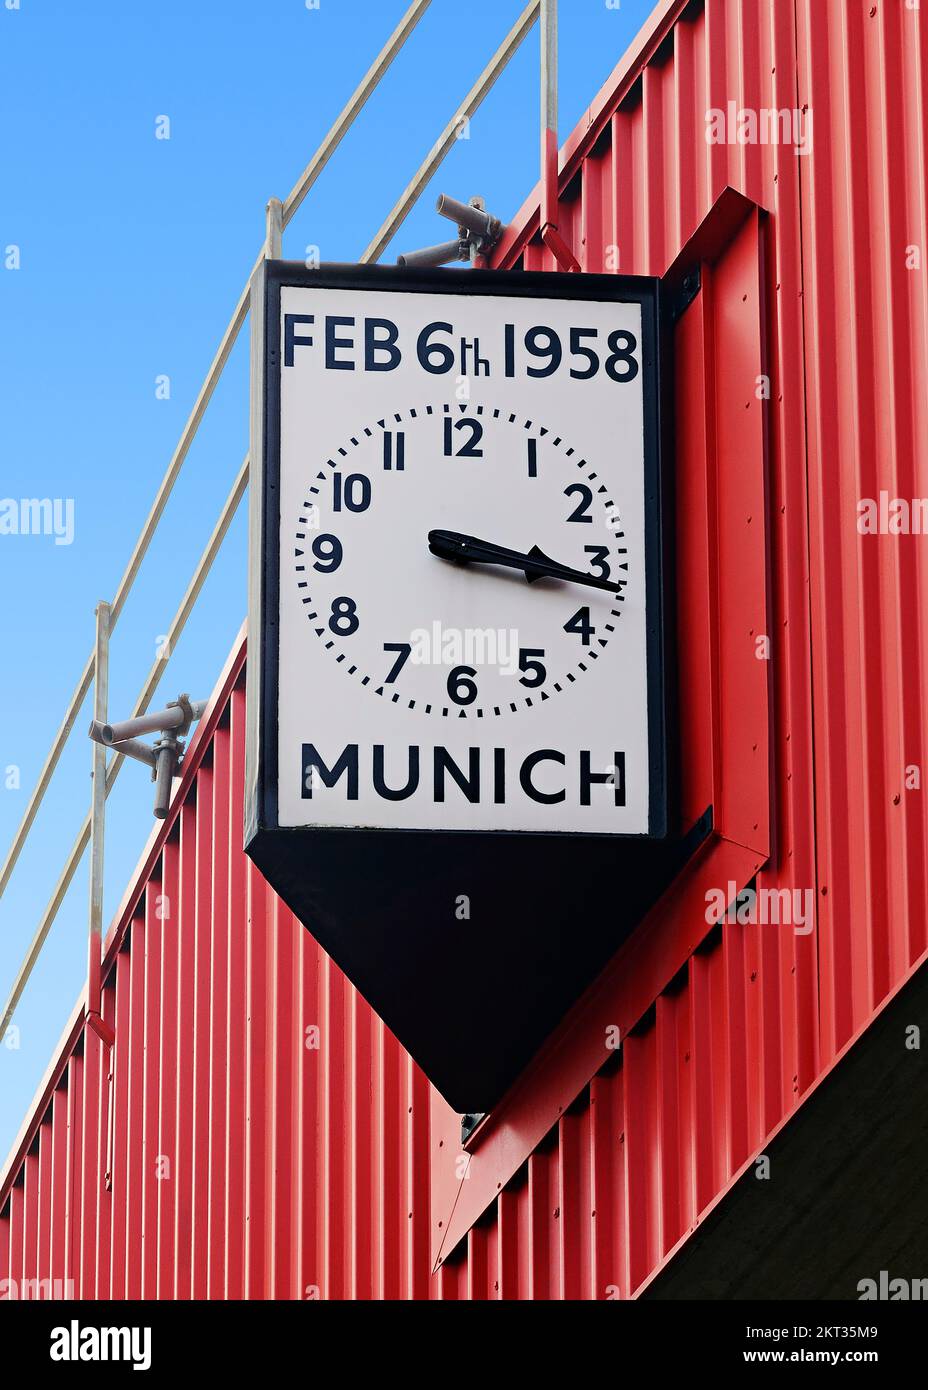 Munich Clock at the Old Trafford Stadium, showing the time and date of the Munich Air Disaster that devastated the Man Utd team. Manchester, UK Stock Photo